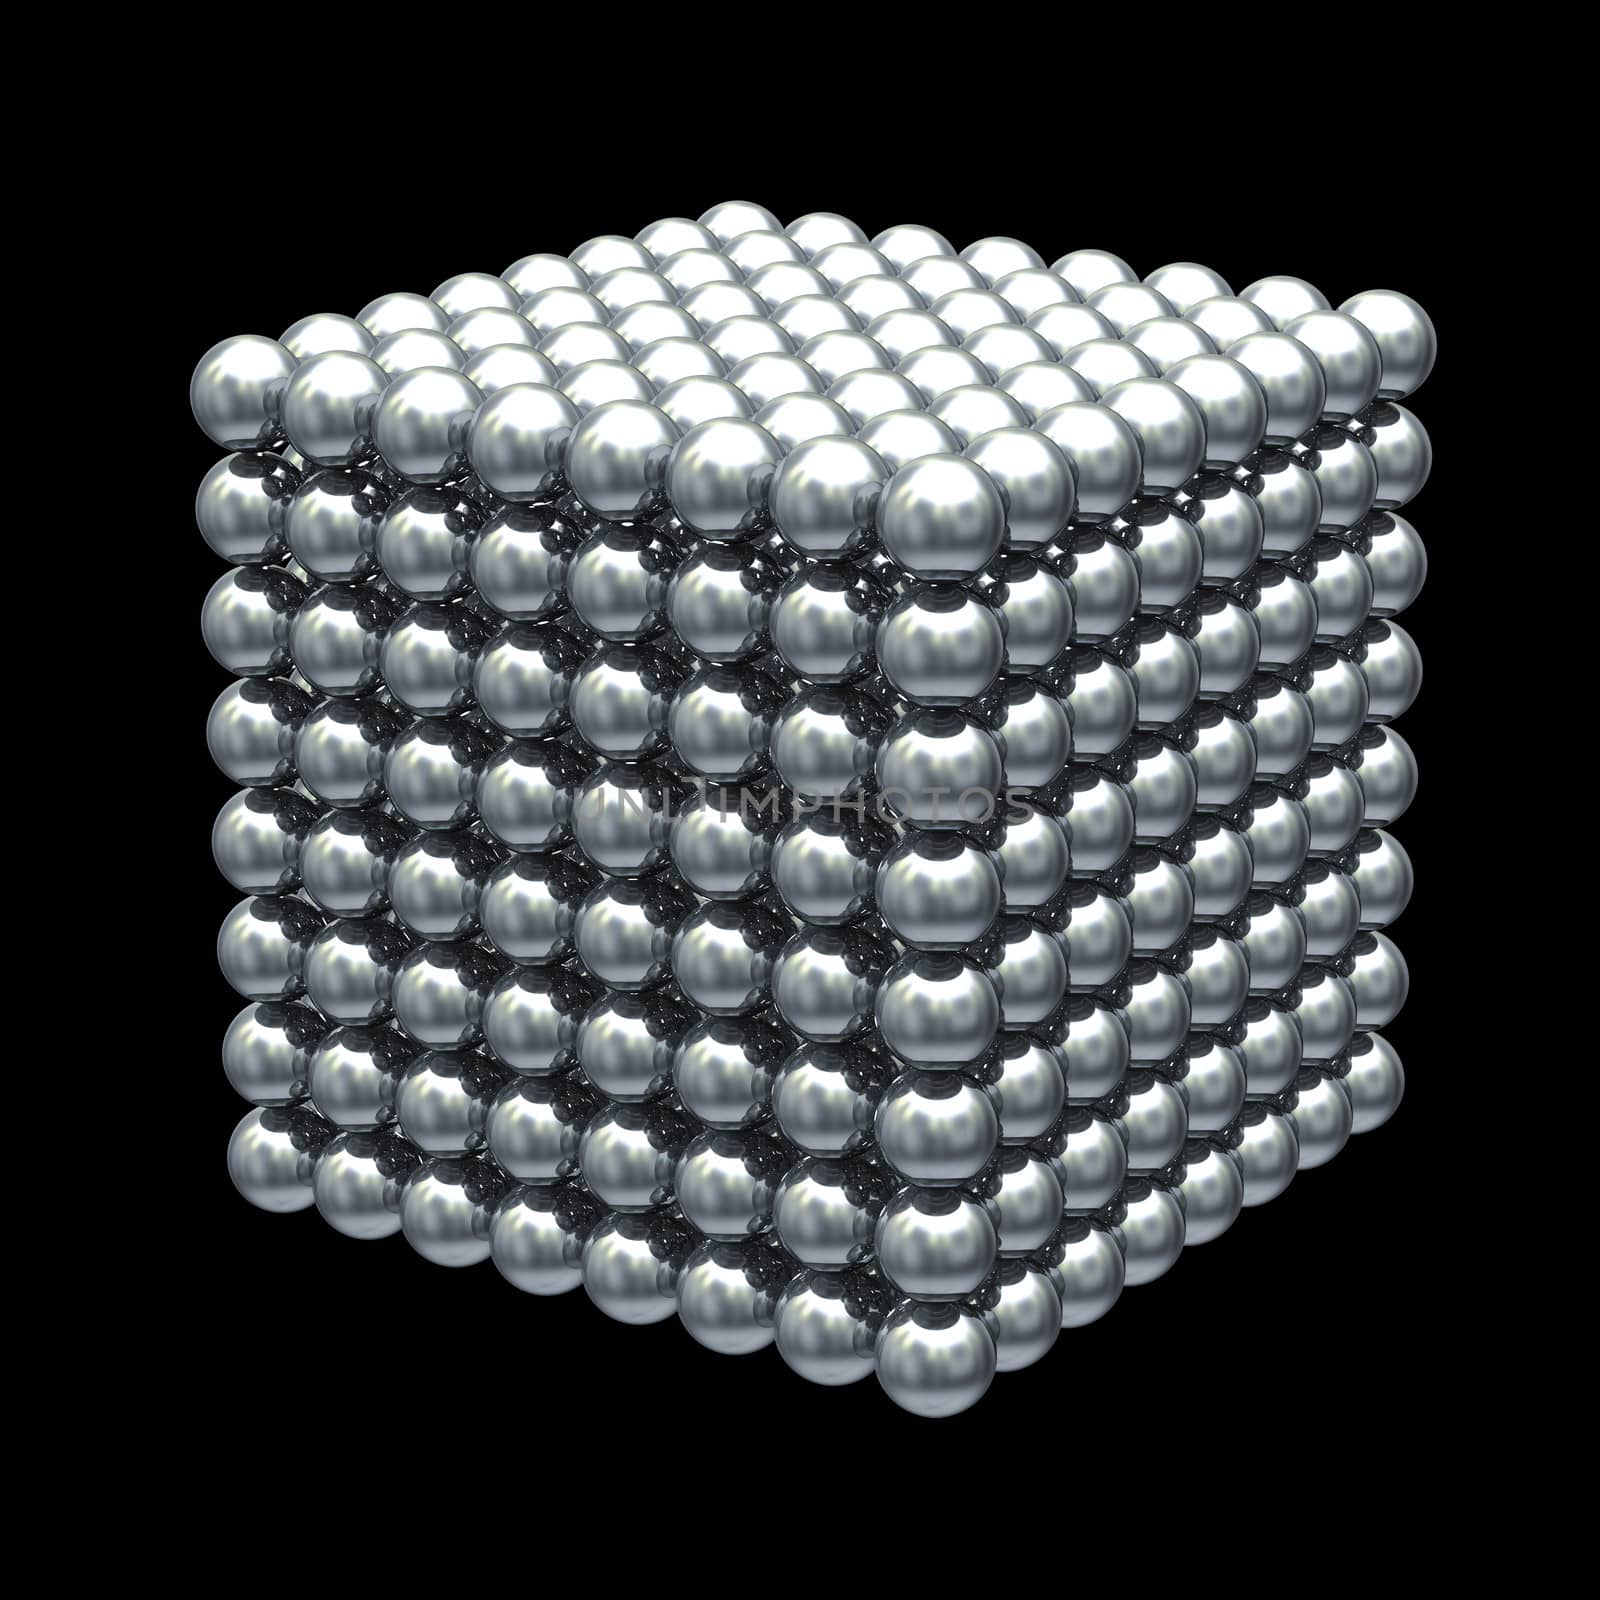 Magnetic metal balls cube - clipping path